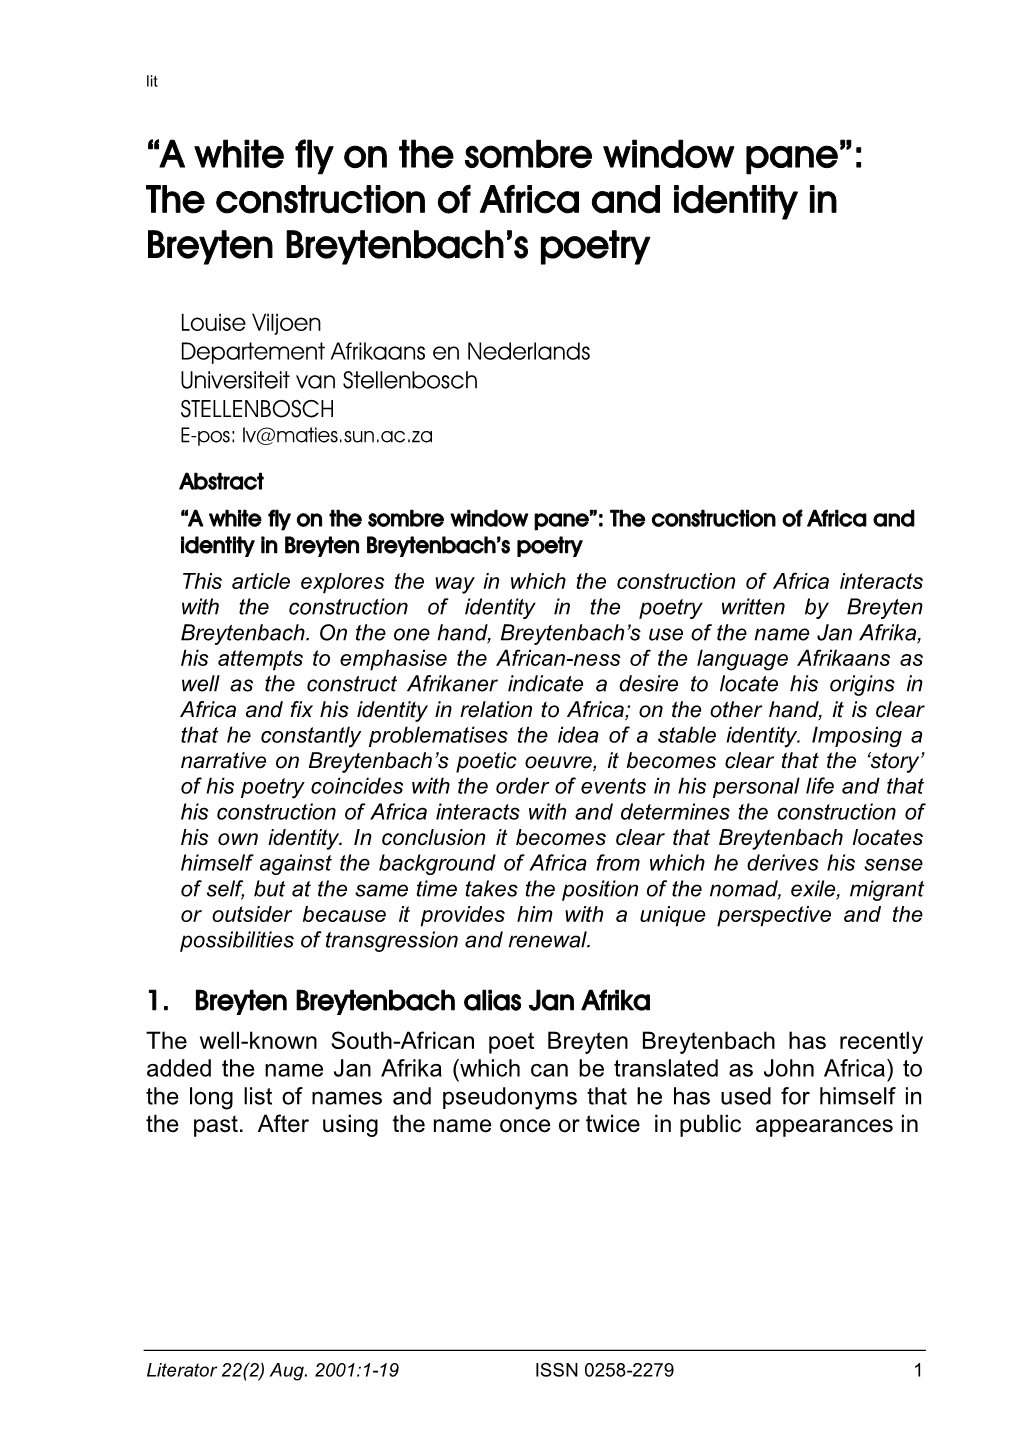 The Construction of Africa and Identity in Breyten Breytenbach’S Poetry